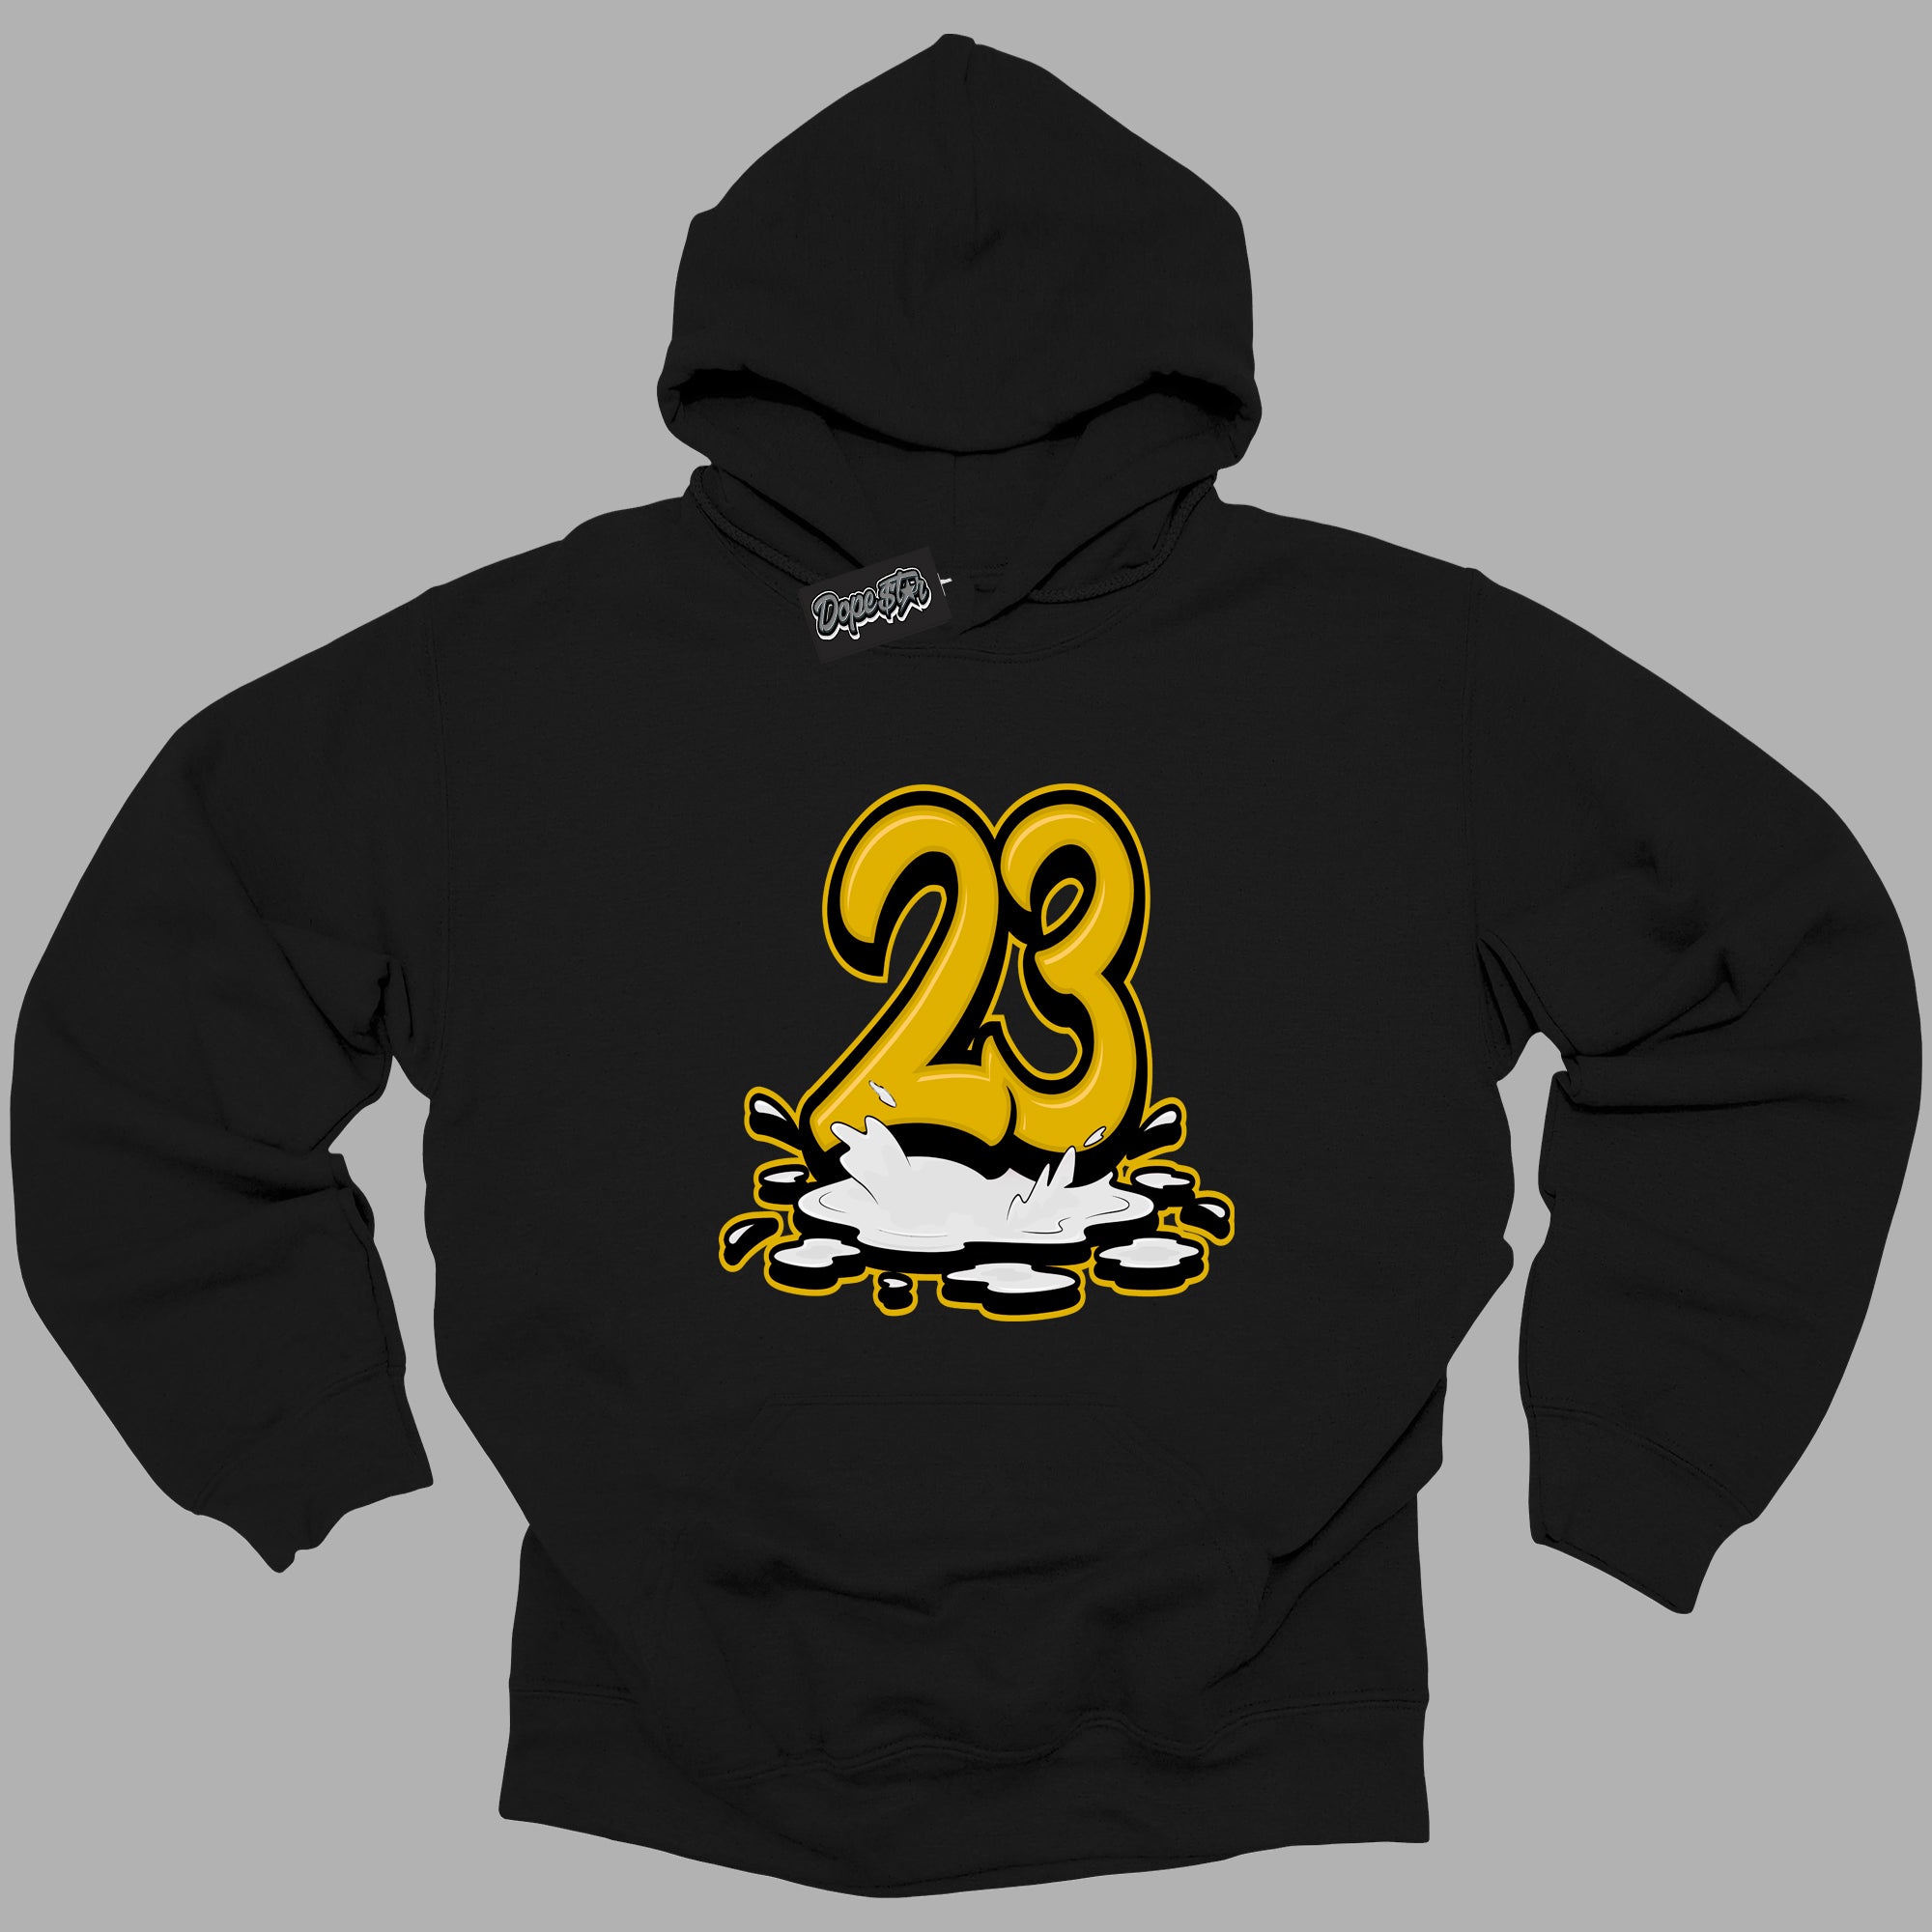 Cool Black Hoodie with “ 23 Melting  ”  design that Perfectly Matches Yellow Ochre 6s Sneakers.